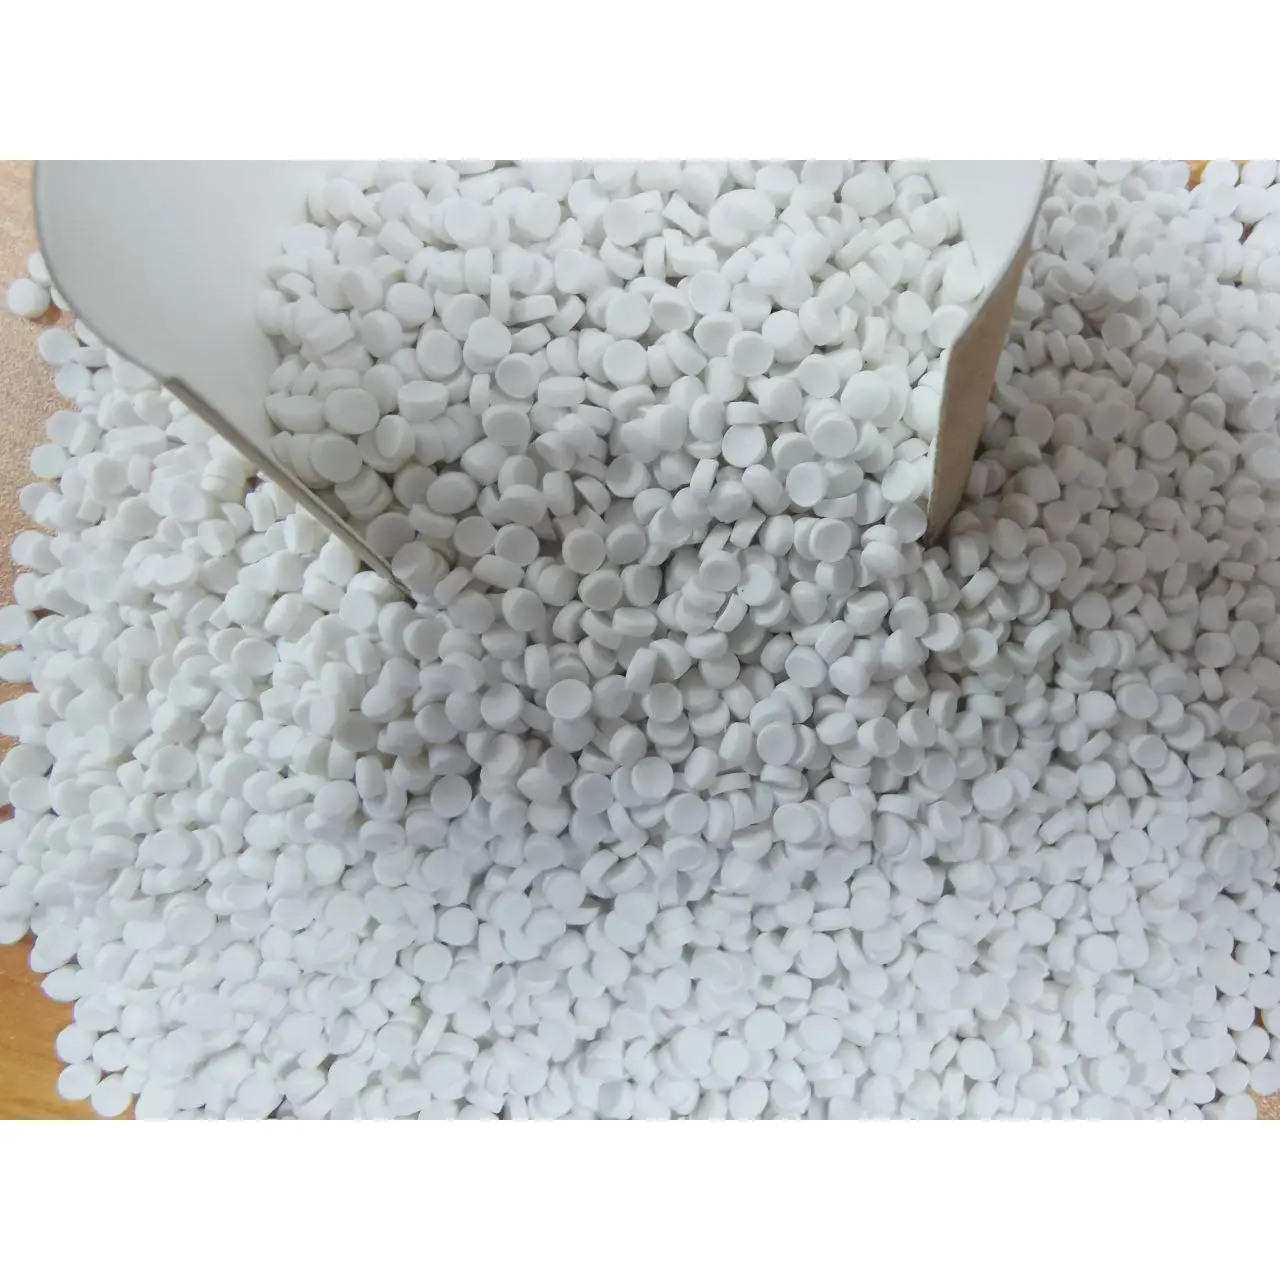 Premium Quality Higher Grade Calcium Carbonate Filler Master Batch For Jerry Can Manufacturing Pellet Form Bag Packing